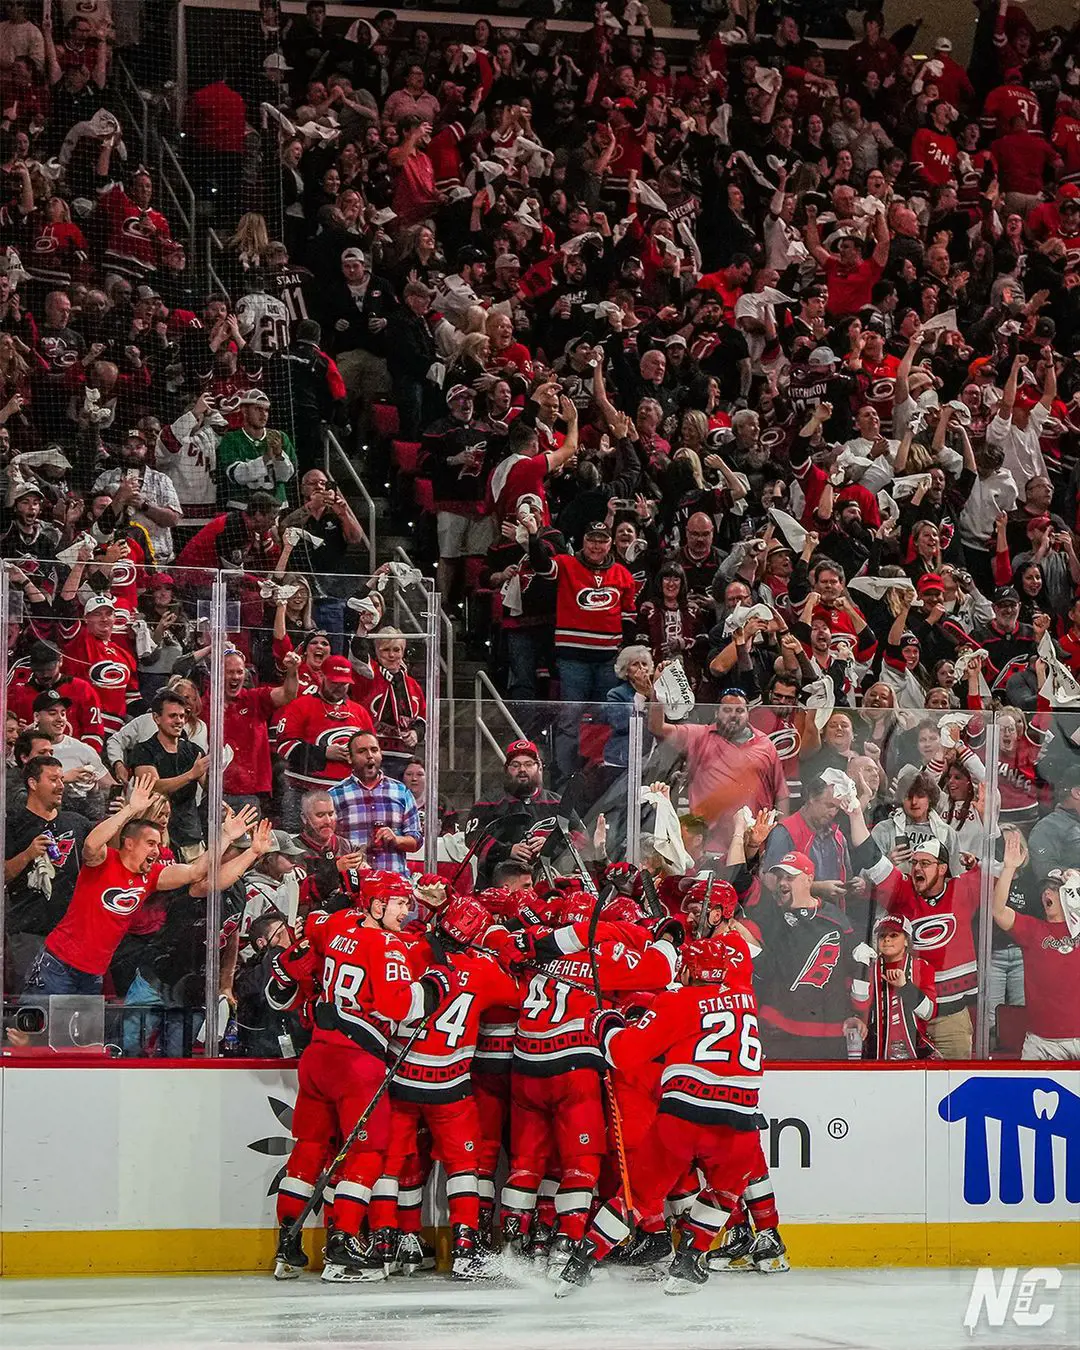 The Canes won the match against the New York Islanders in round 1 of Game 2